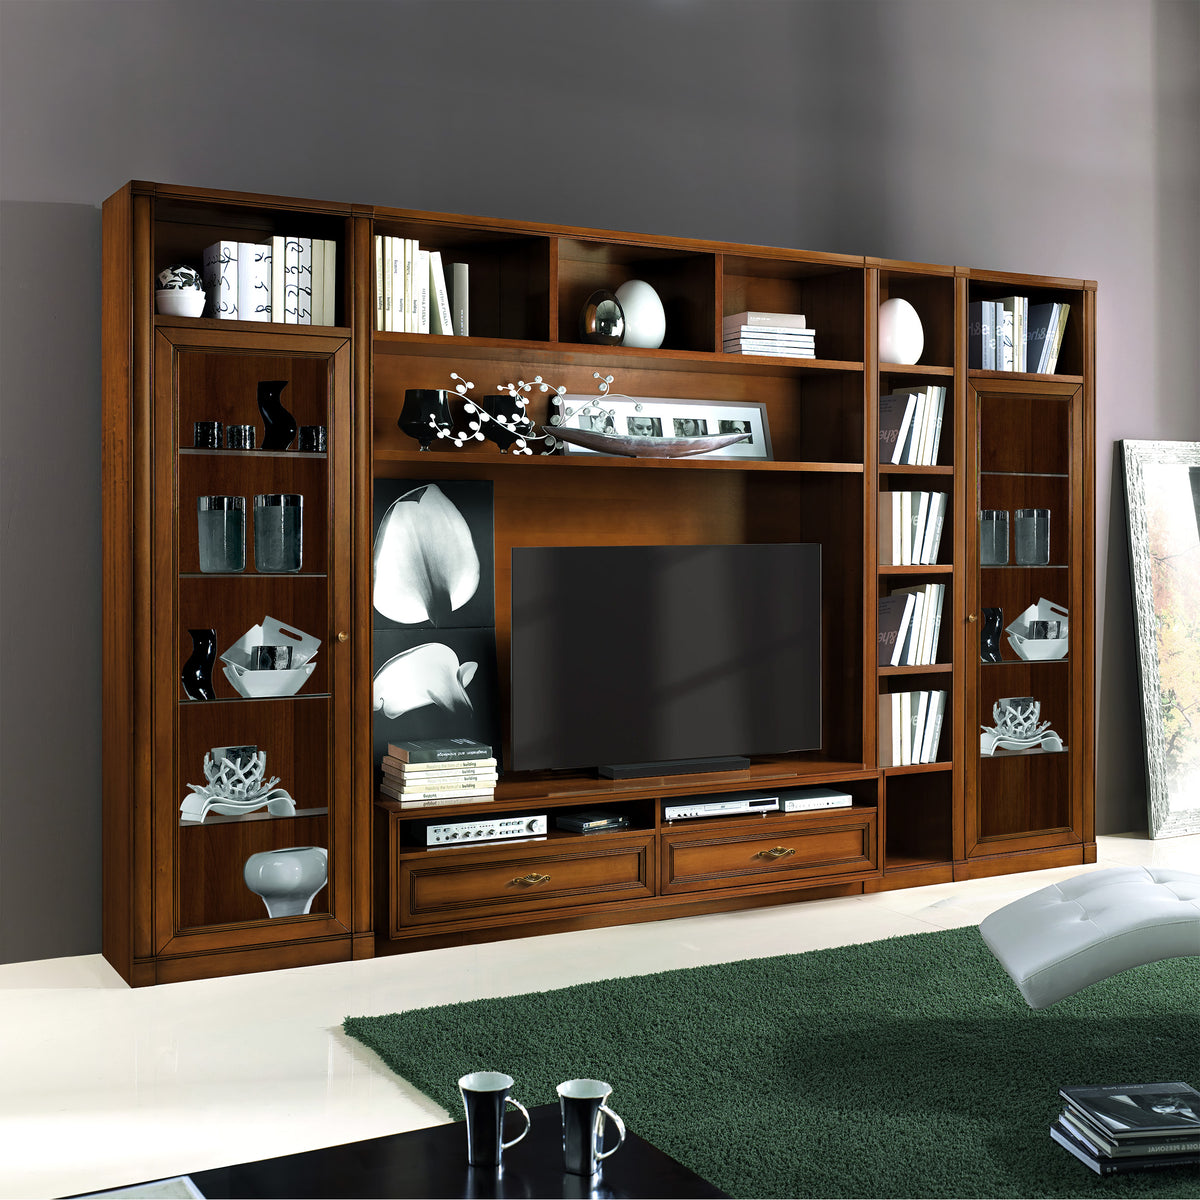 Classic Living Room Mobile Wall L 365 cm In Cherry Wood Finish Arte D'Este Piombini Collection